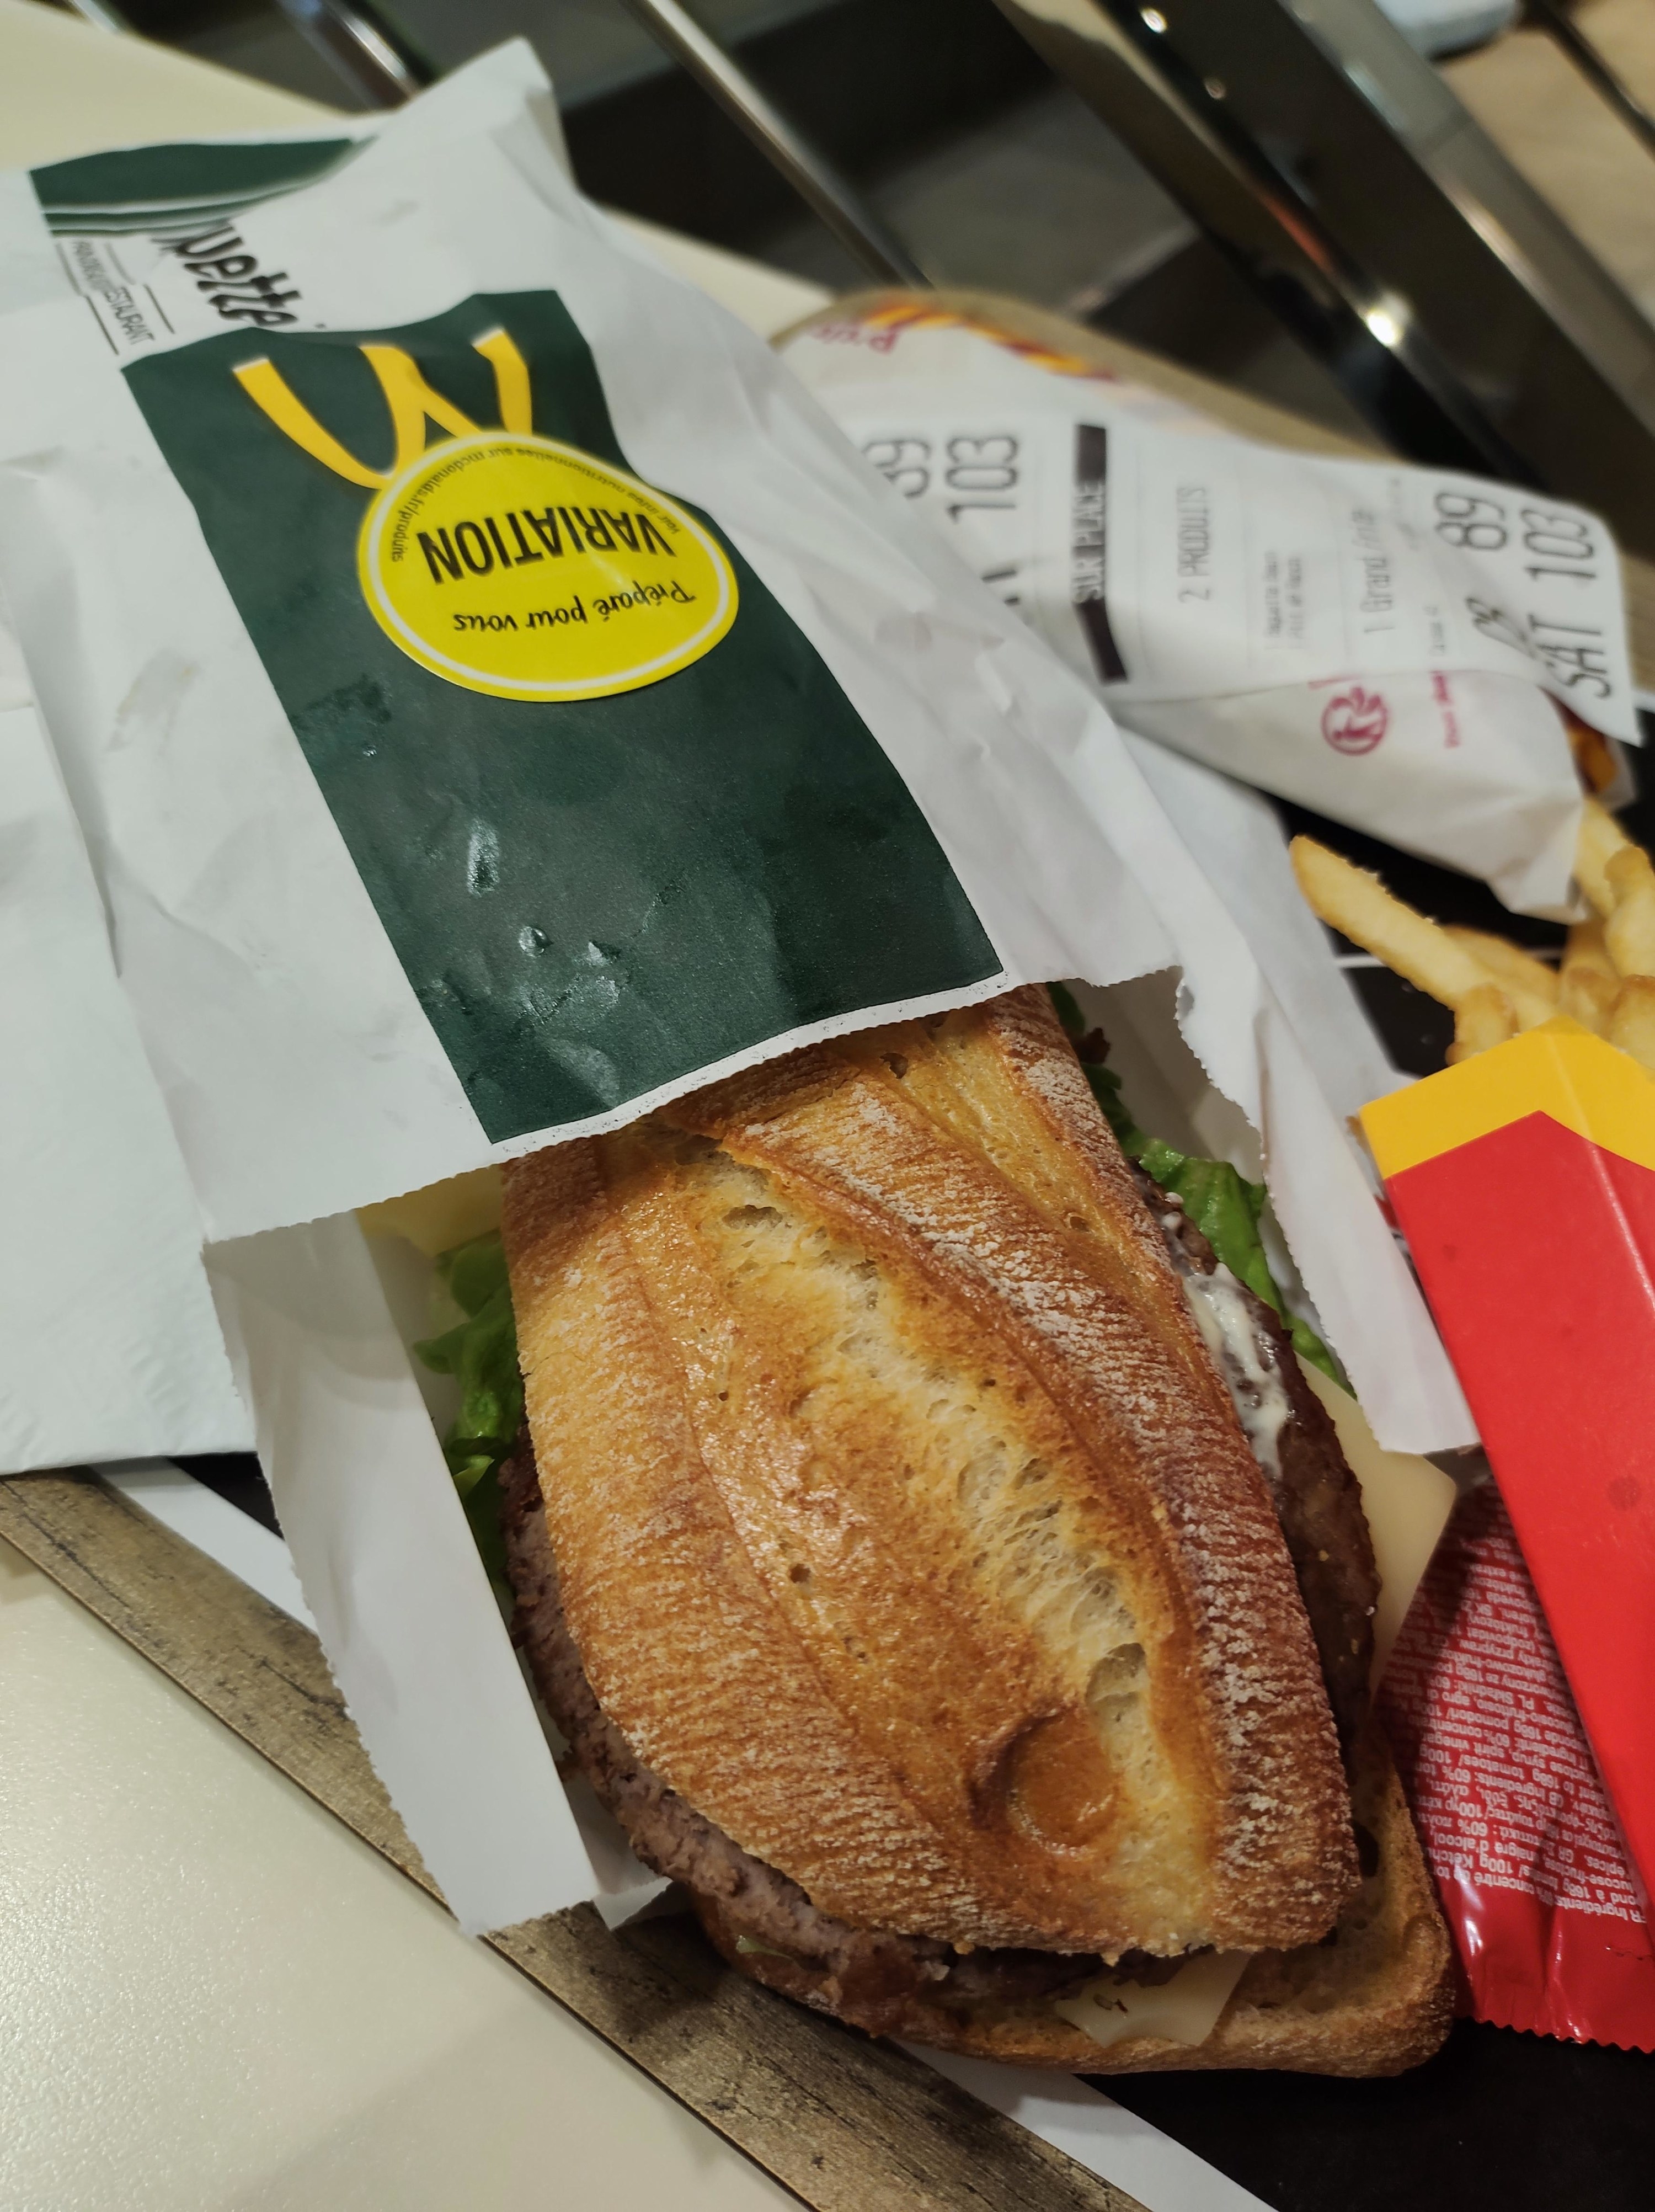 A baguette emerging from McDonald&#x27;s packaging